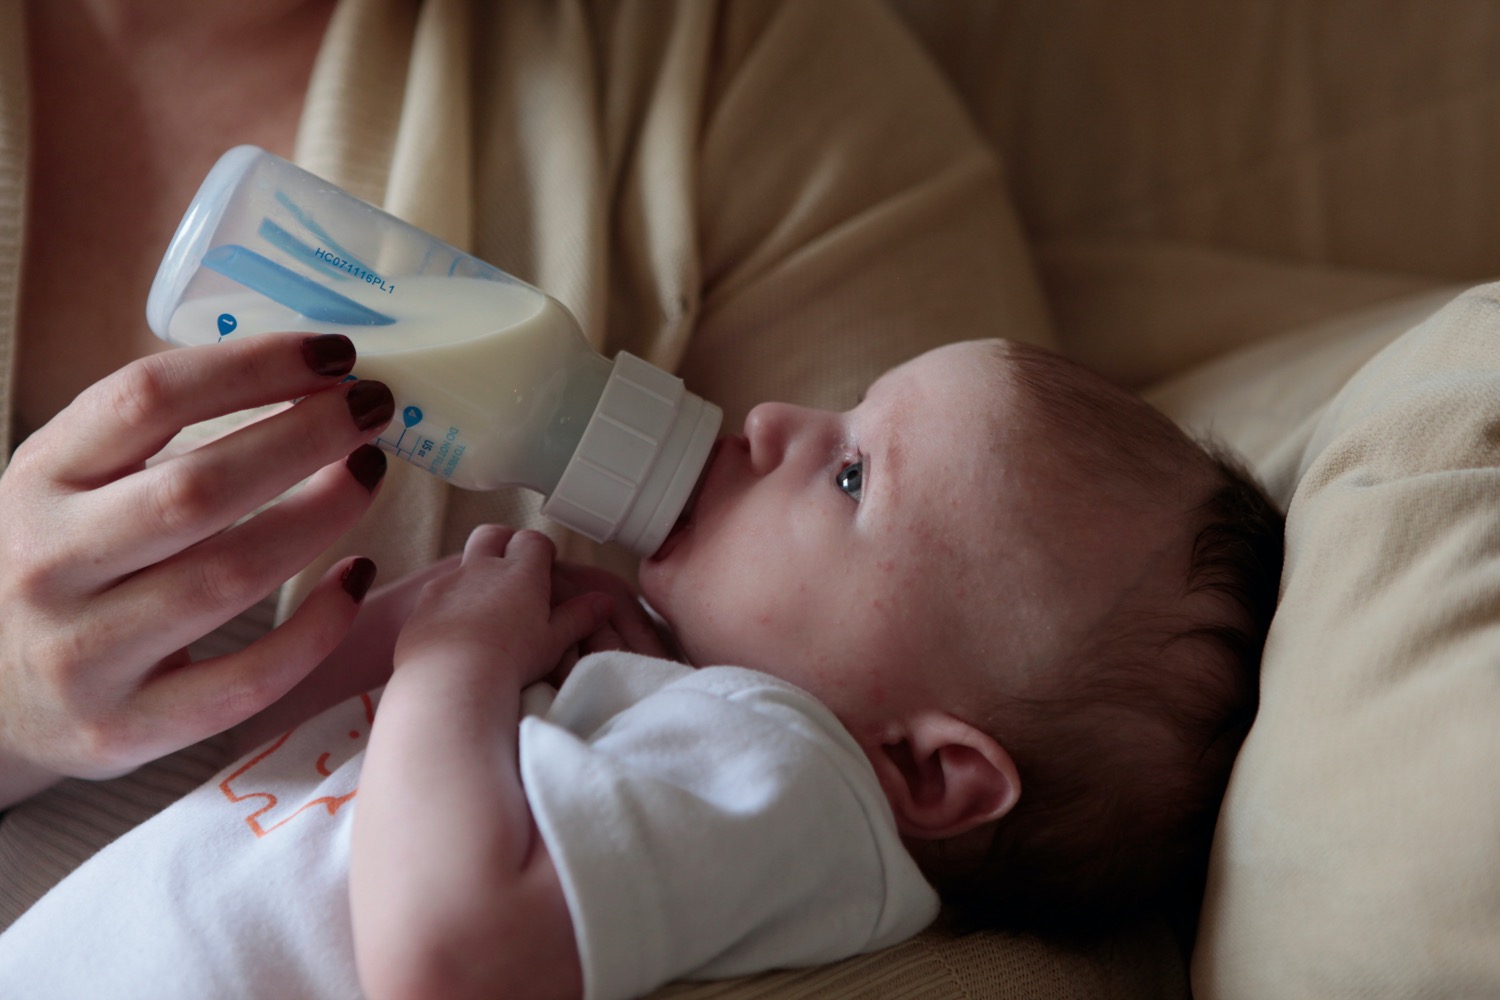 The FDA investigated the ongoing baby formula shortage. Here’s what it found.